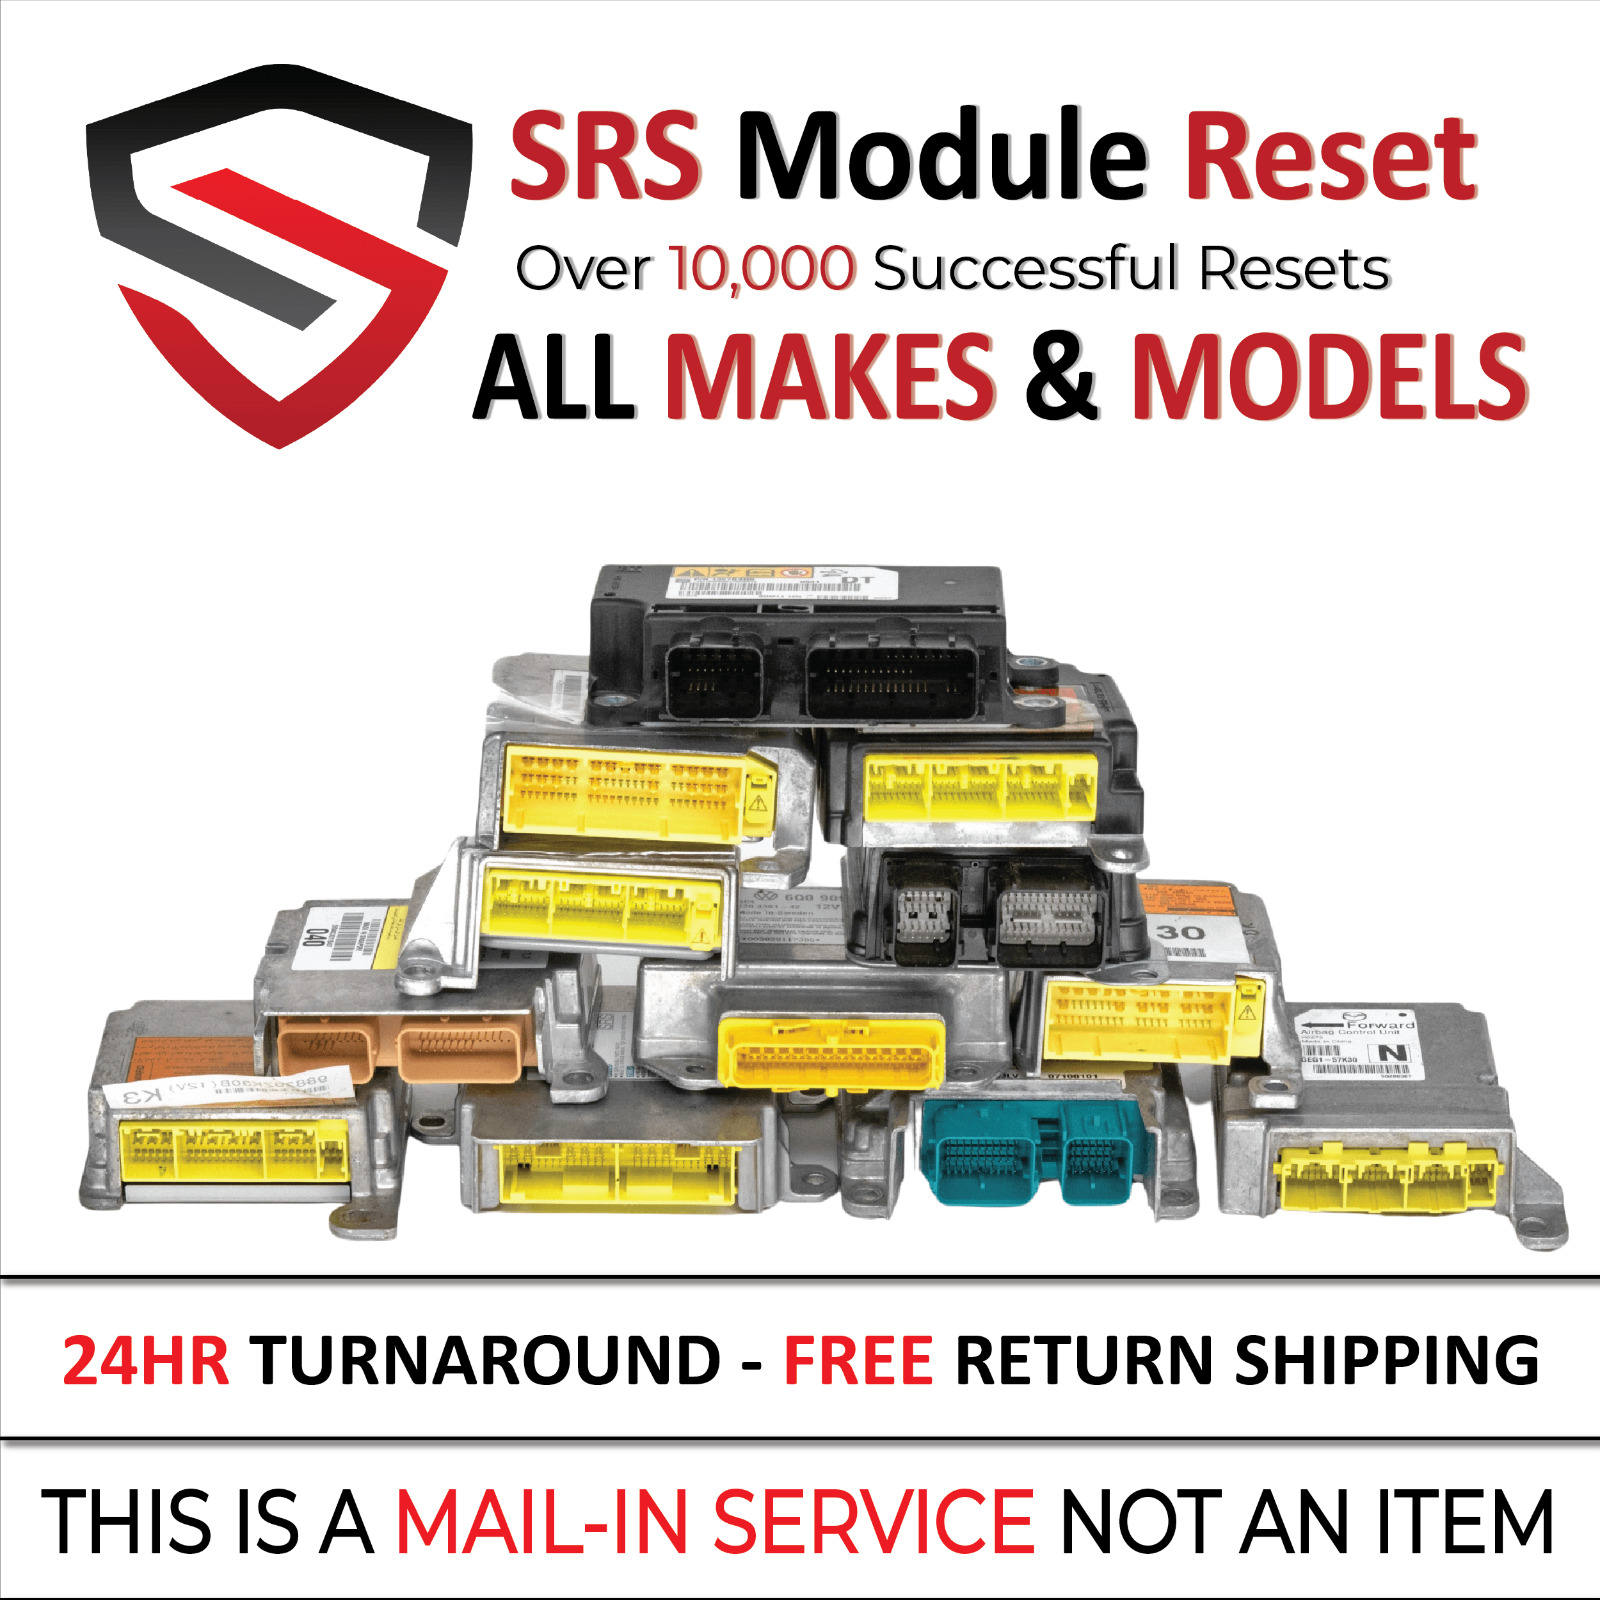 For Buick SRS Module Reset Repair Service - Guaranteed or Your Money Back